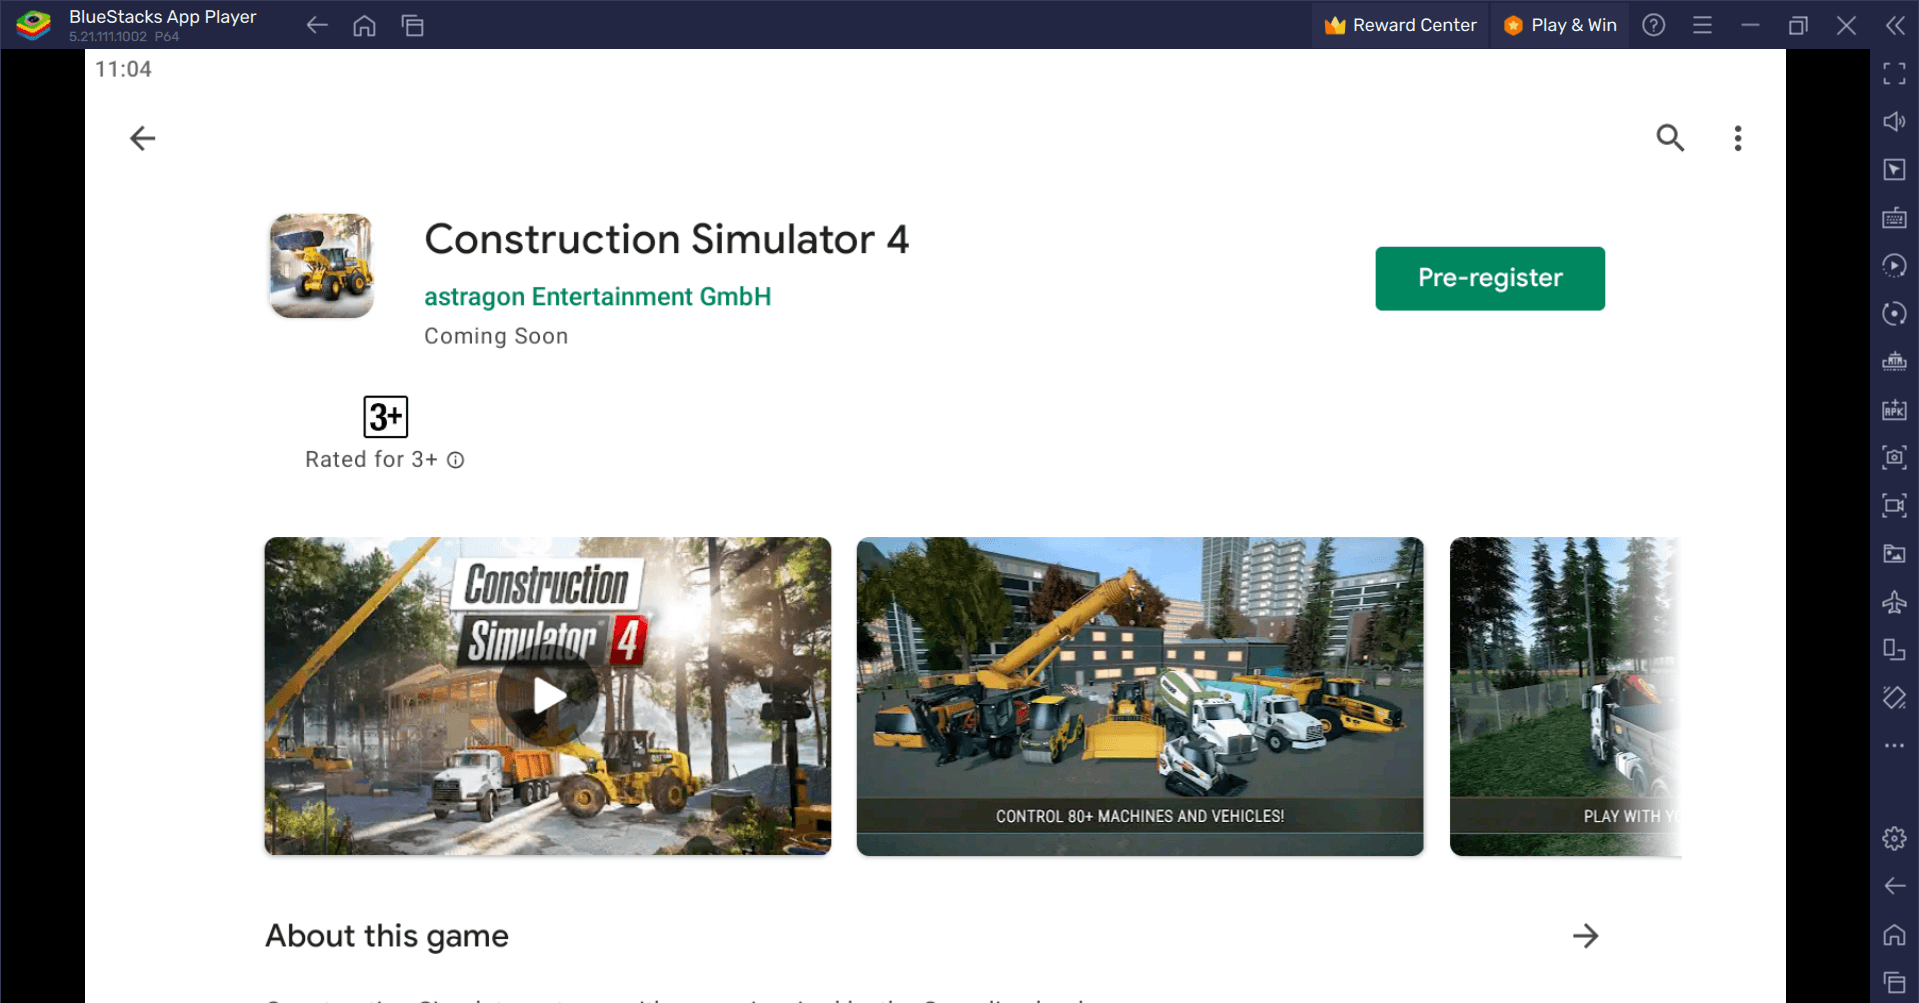 How to Play Construction Simulator 4 on PC with BlueStacks